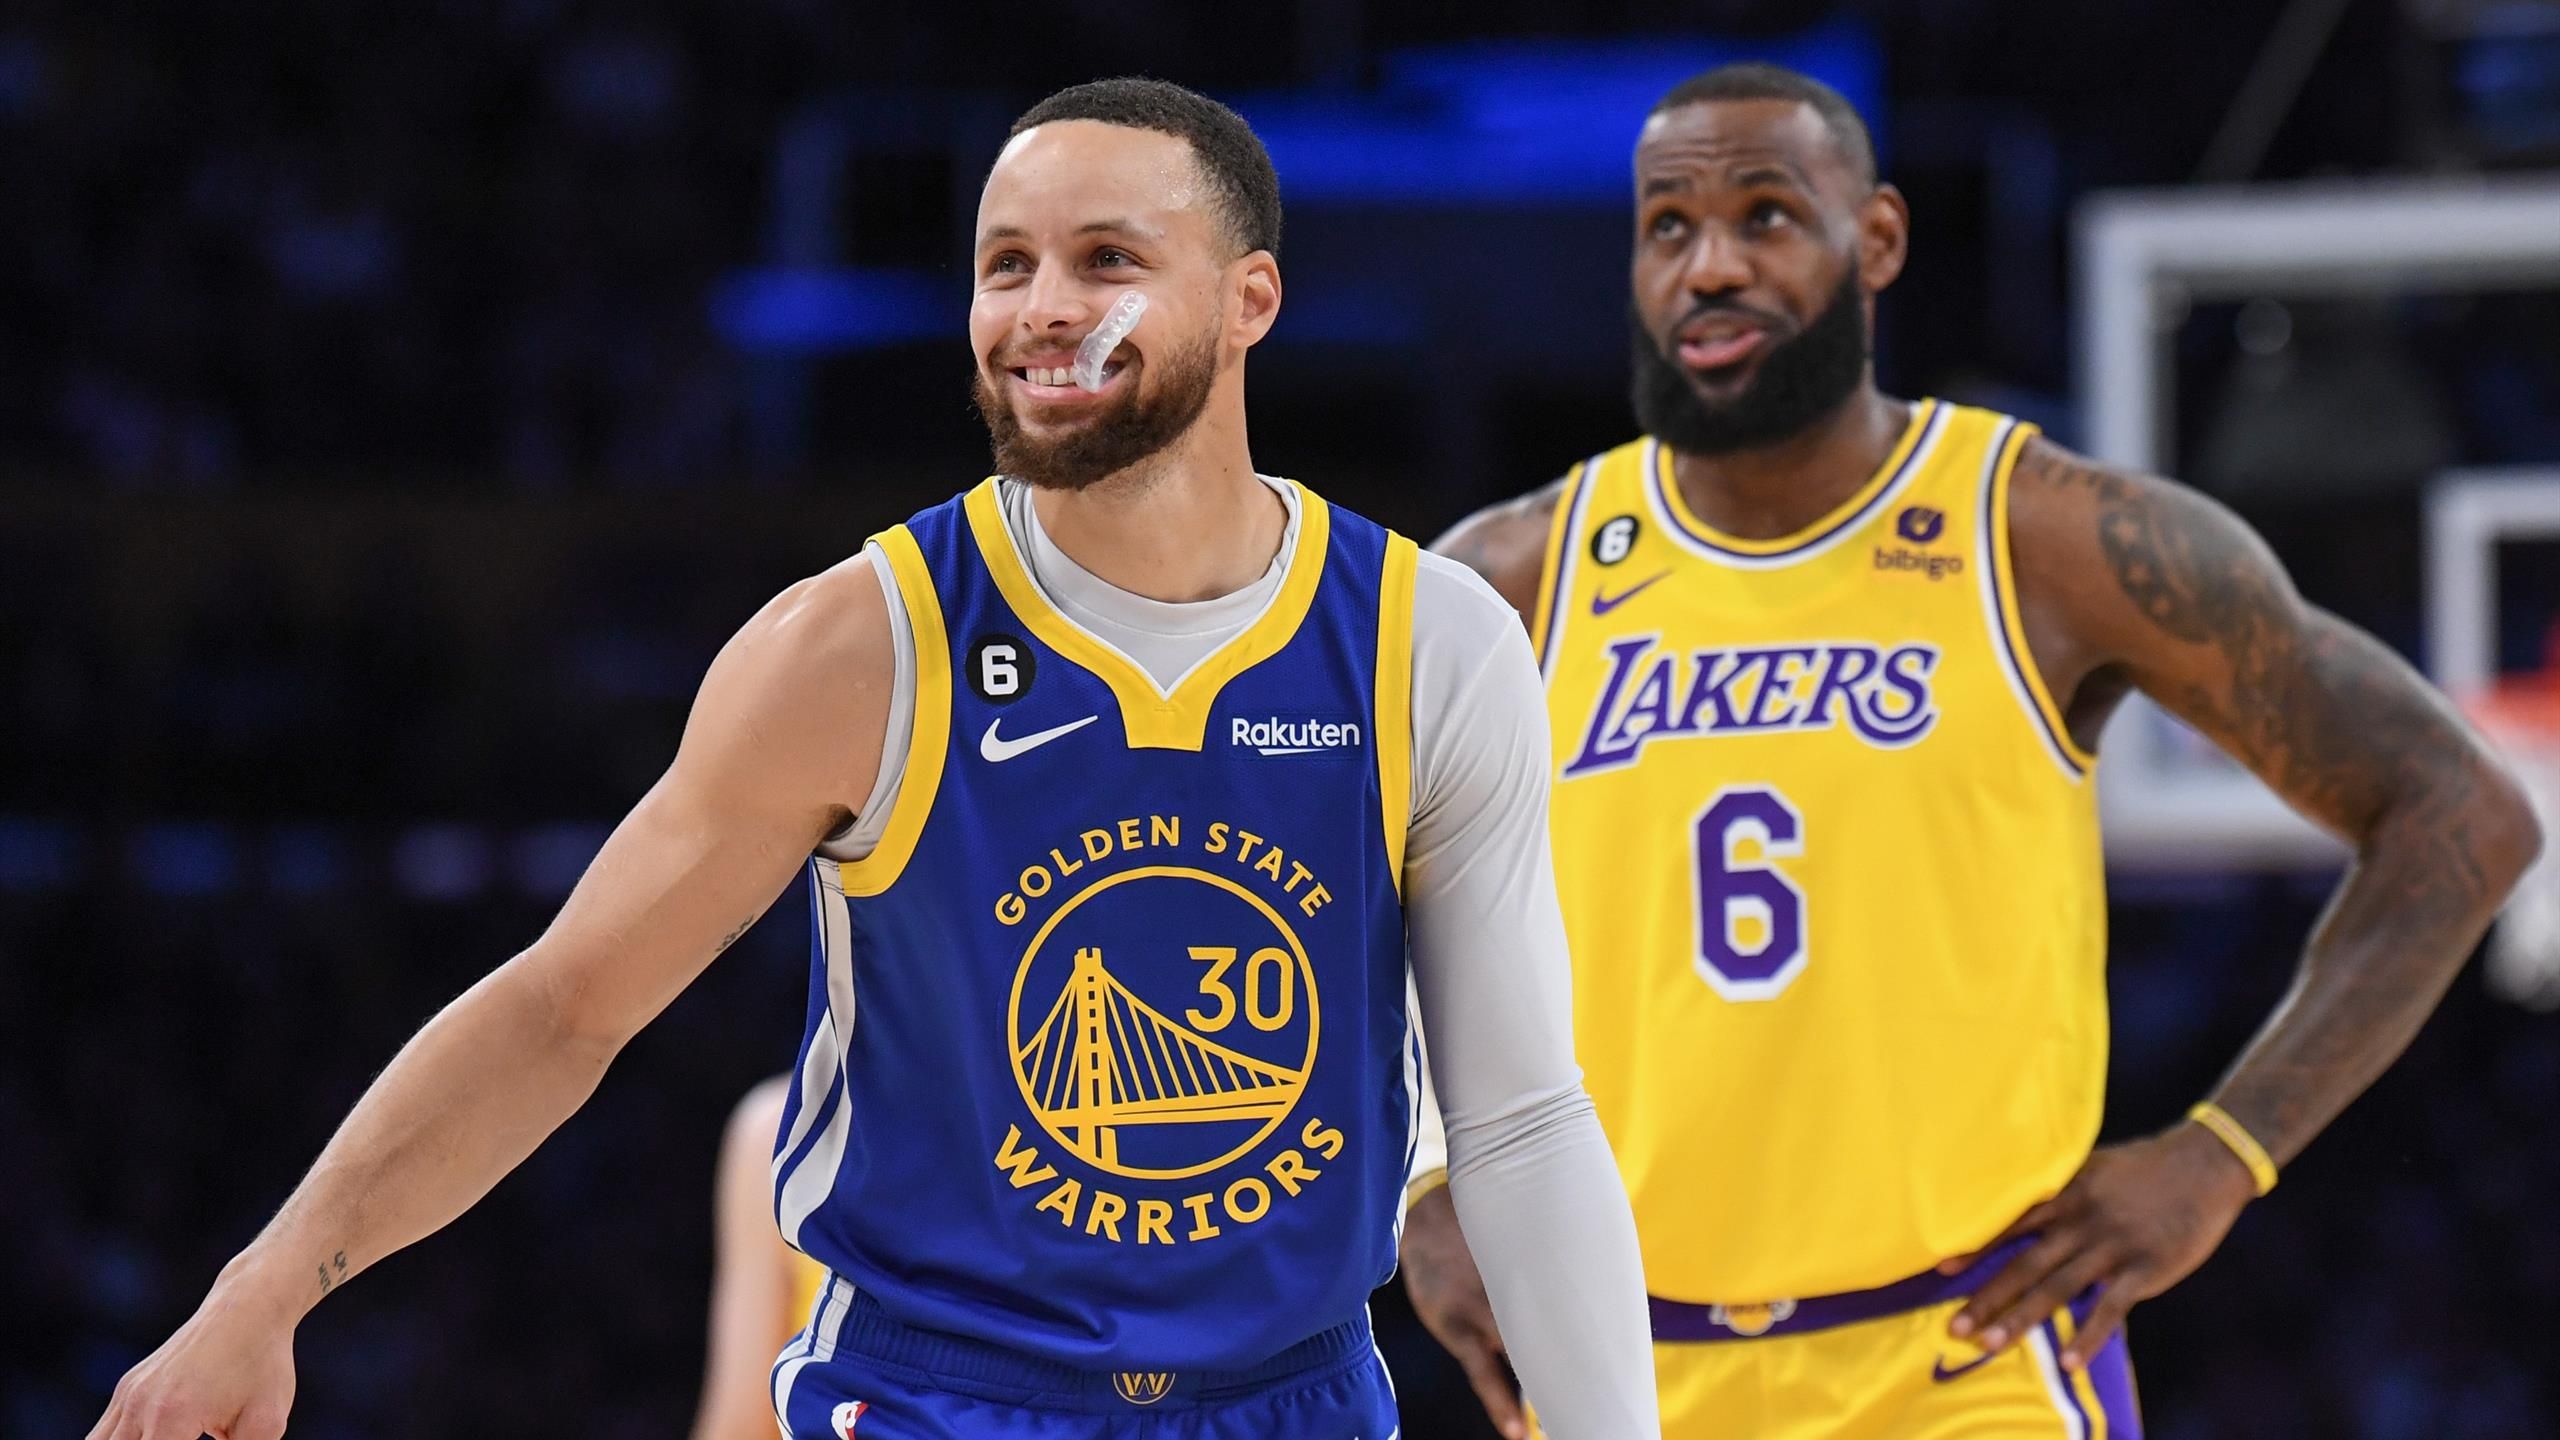 Where to Watch NBA All-Star Game Online Free (2023): Live Stream Guide